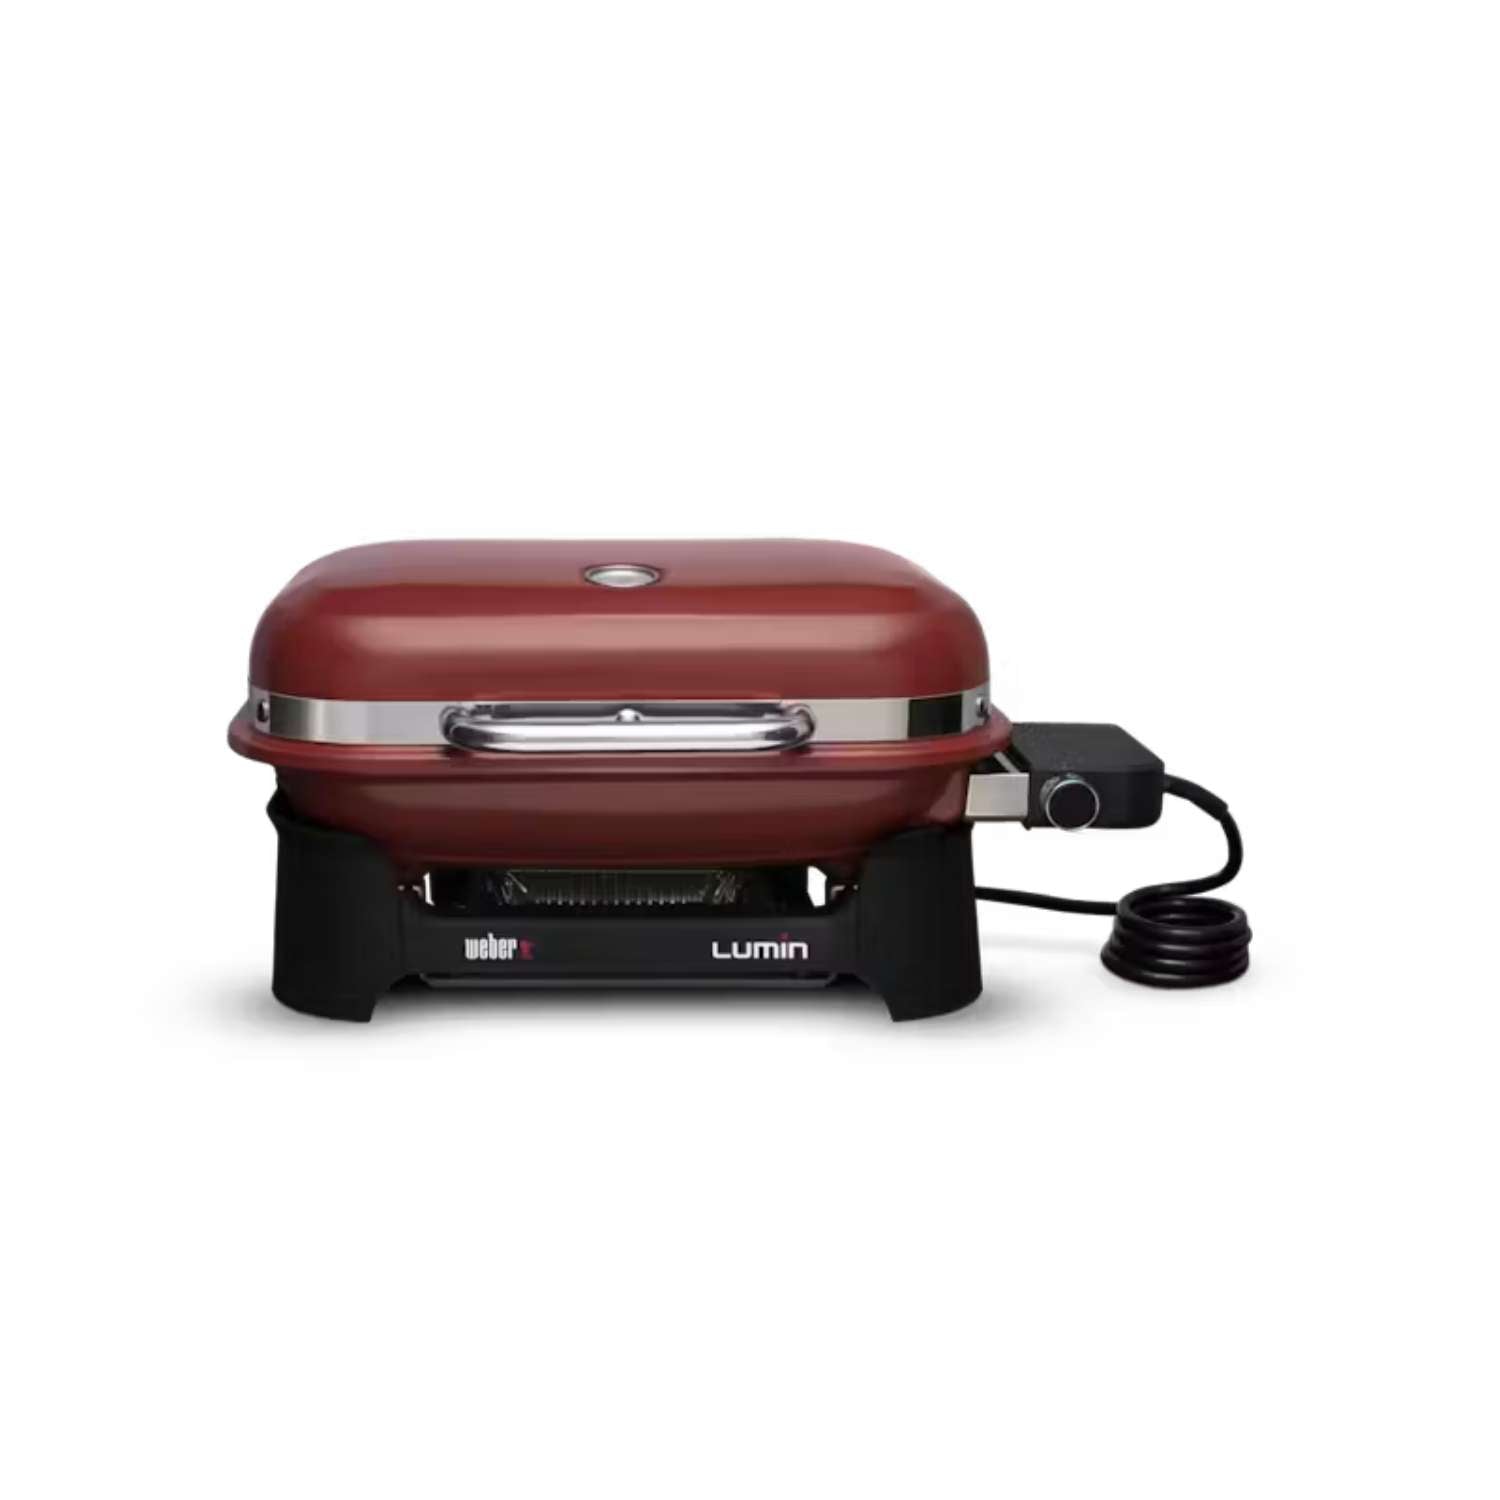 Weber Lumin Compact Grill in Crimson from MeatKing.hk9